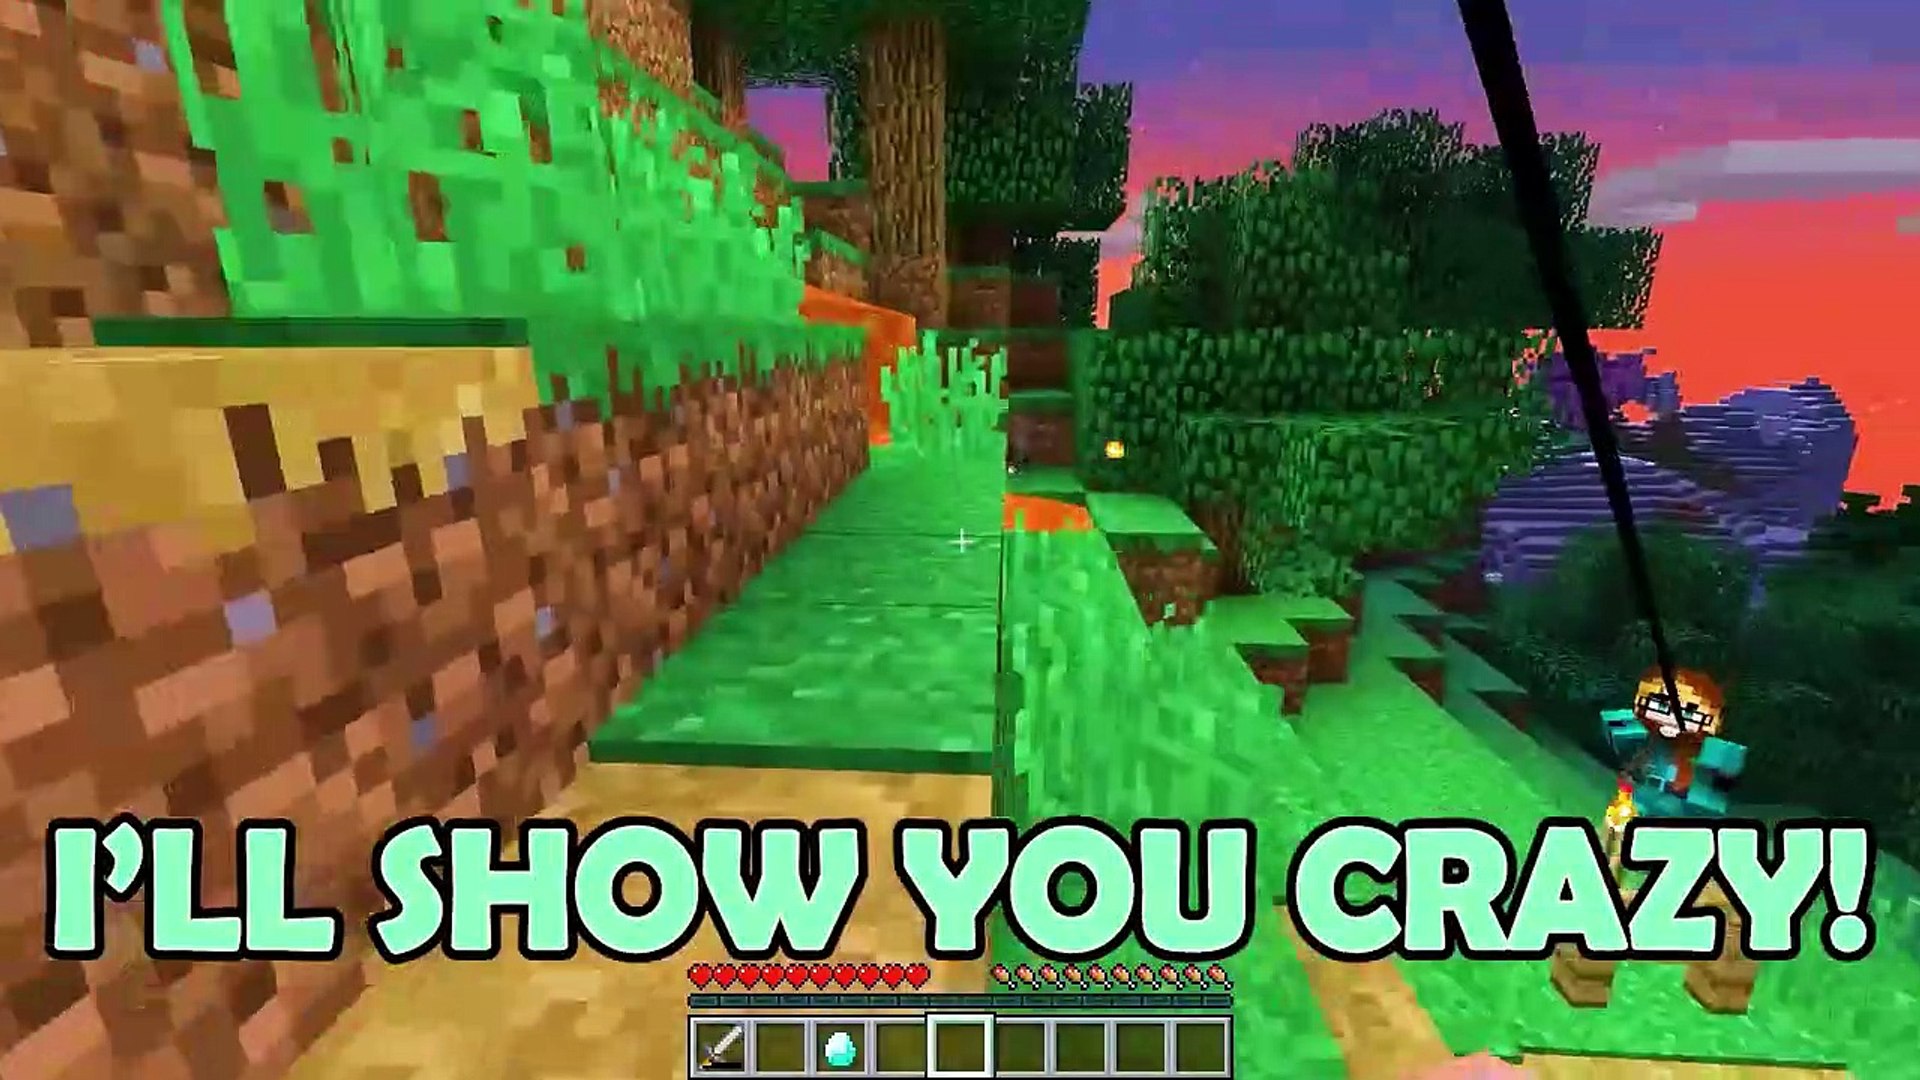 Minecraft but it's GAME OF LIFE! - video Dailymotion